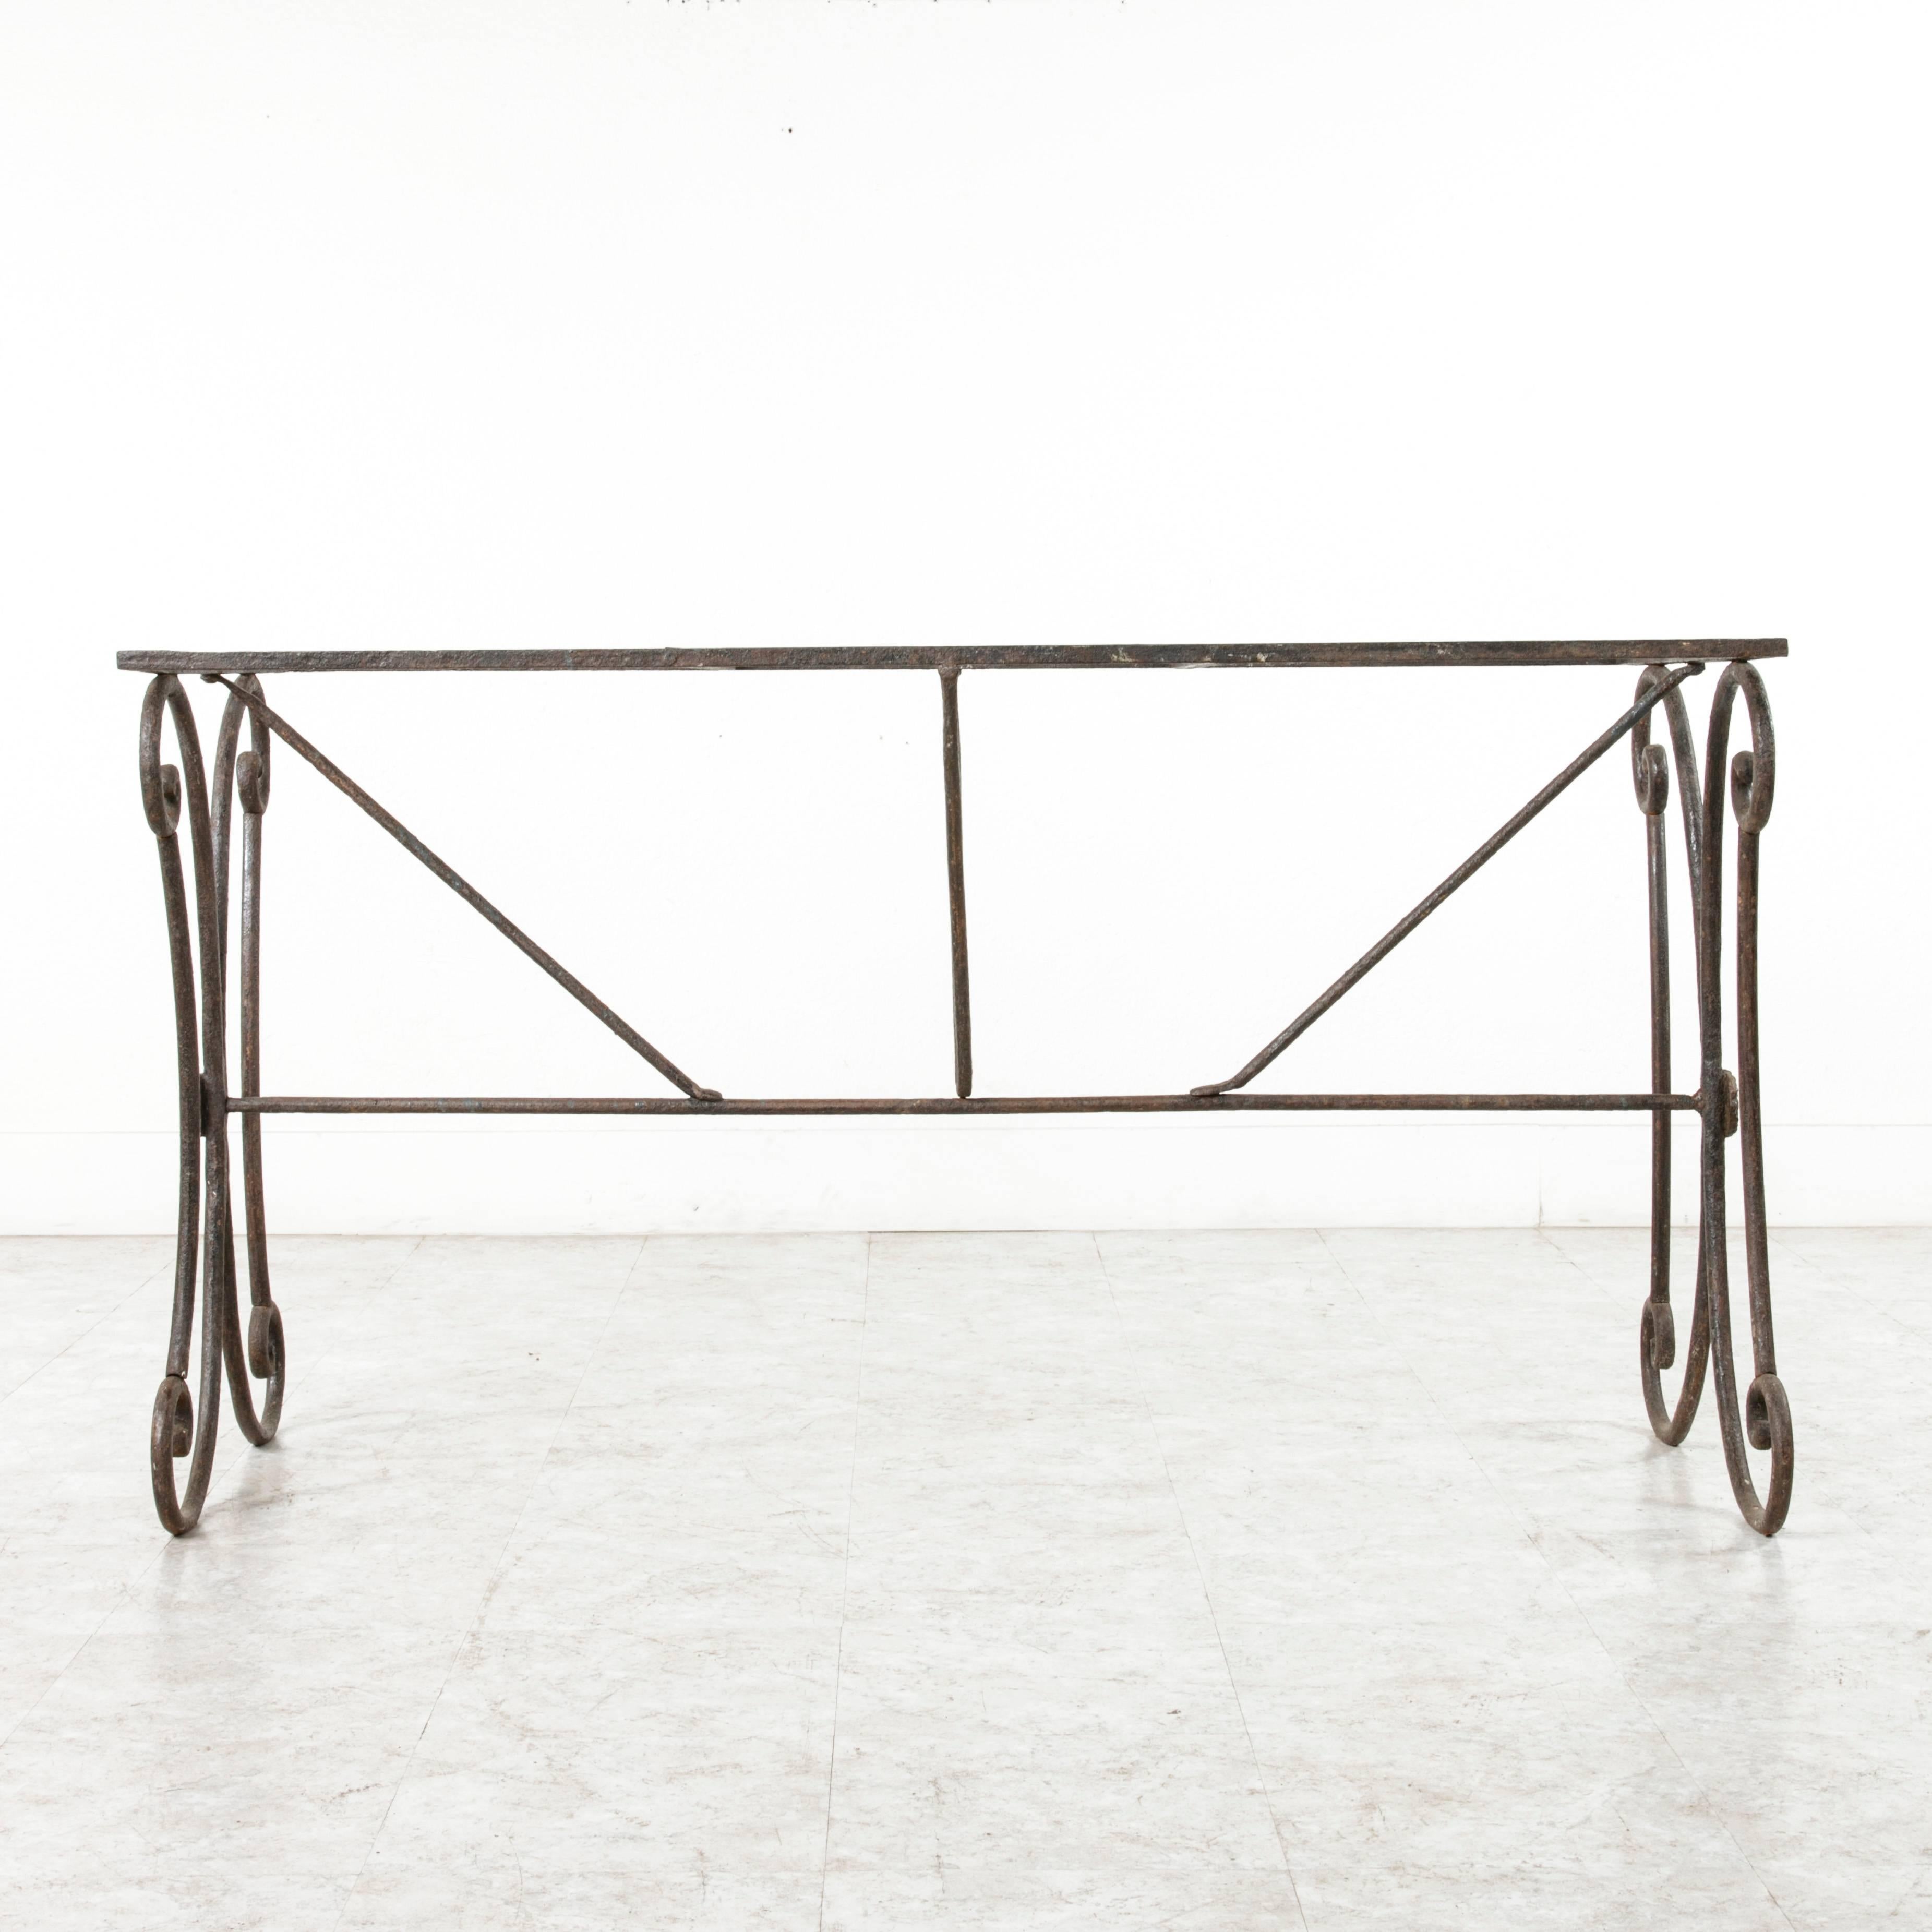 This handsomely aged solid and heavy iron table base would display beautifully with a glass, wood, or stone top. The opportunity to meld old and new styles is rare, and the beautifully curved sculptural sides of this piece combined with its thick,